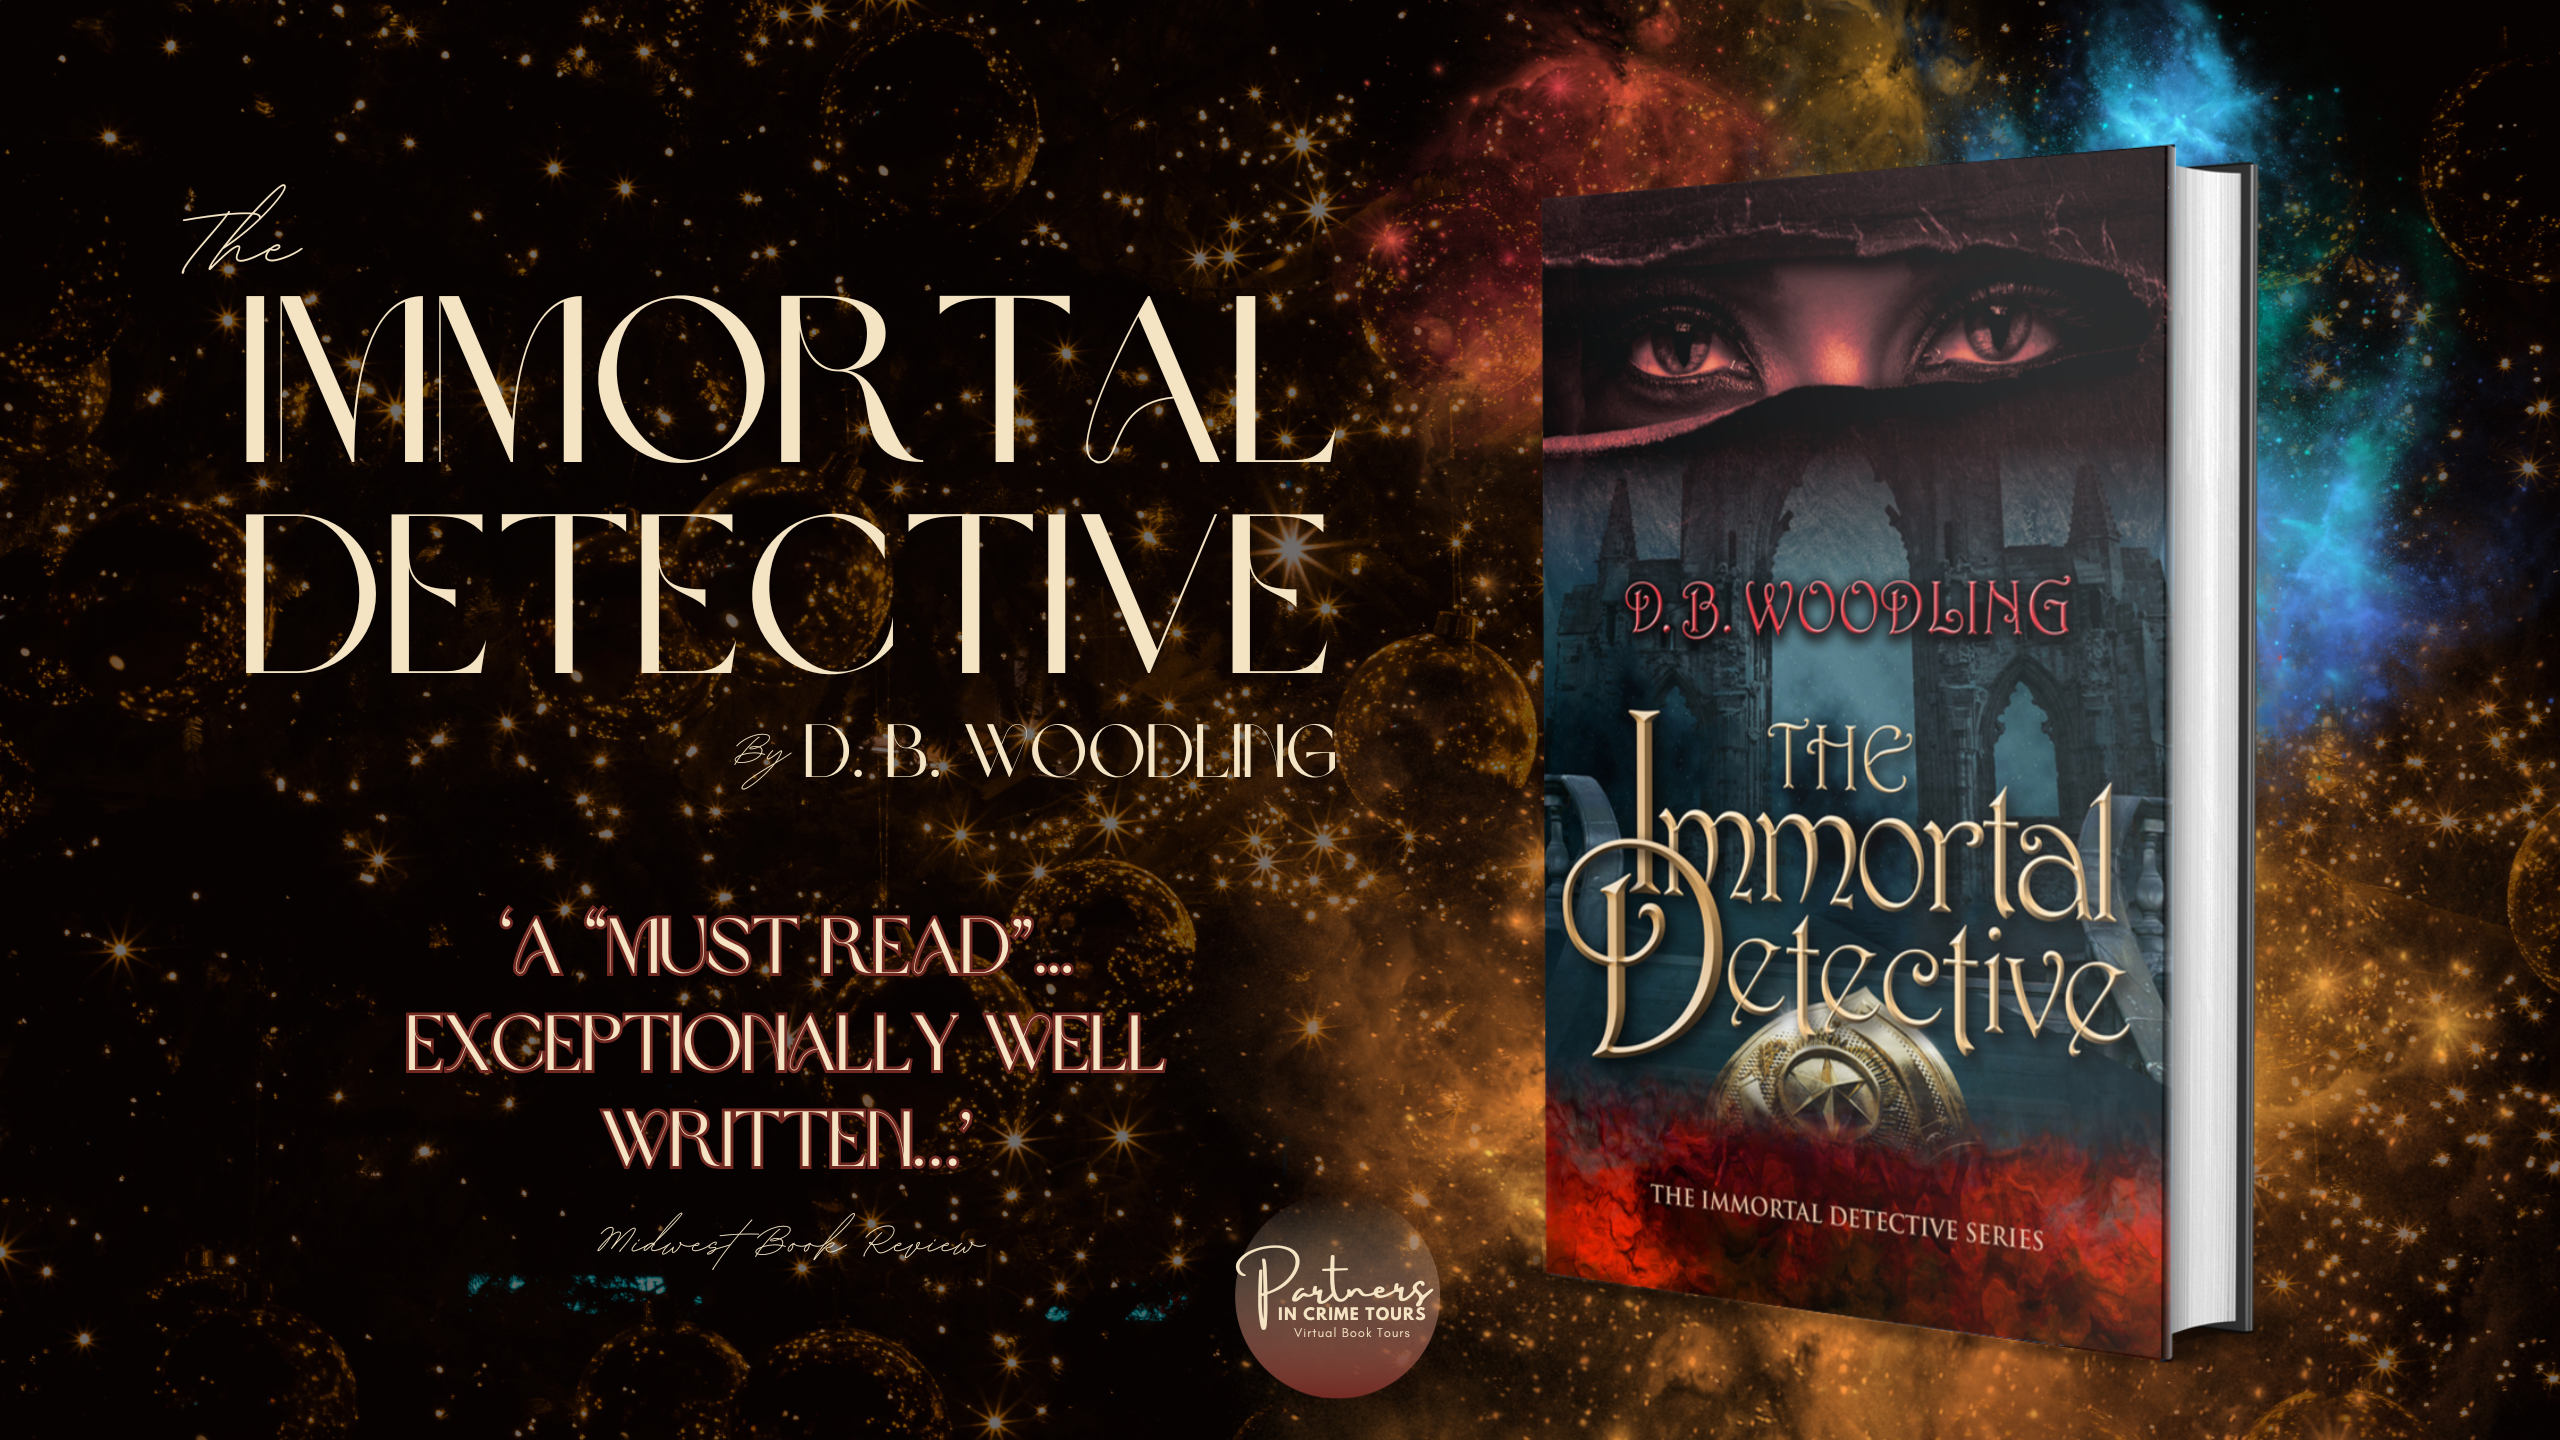 The Immortal Detective by D. B. Woodling Banner